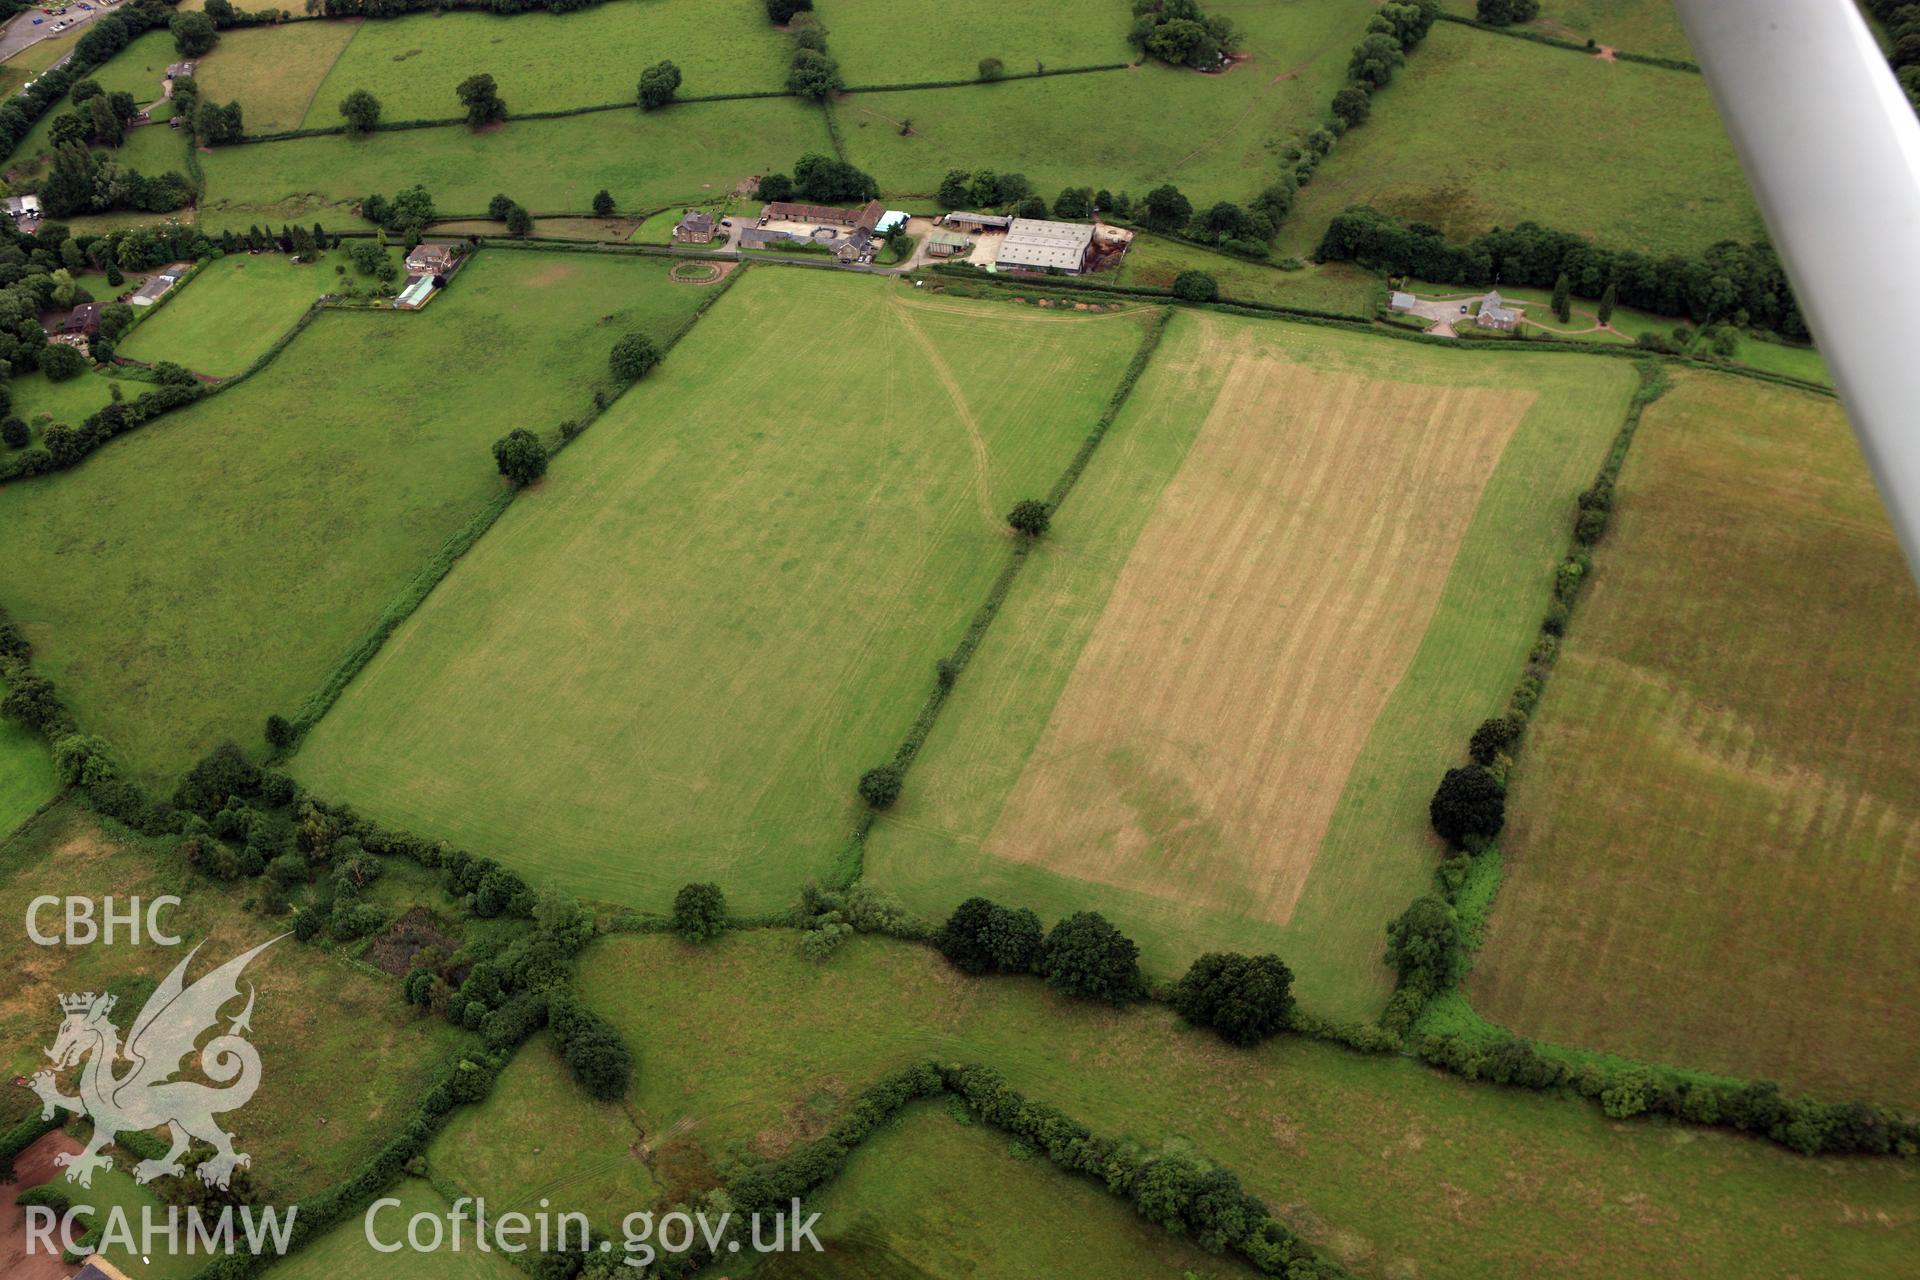 RCAHMW colour oblique aerial photograph showing non - archaeological cropmarks. Taken on 09 July 2009 by Toby Driver